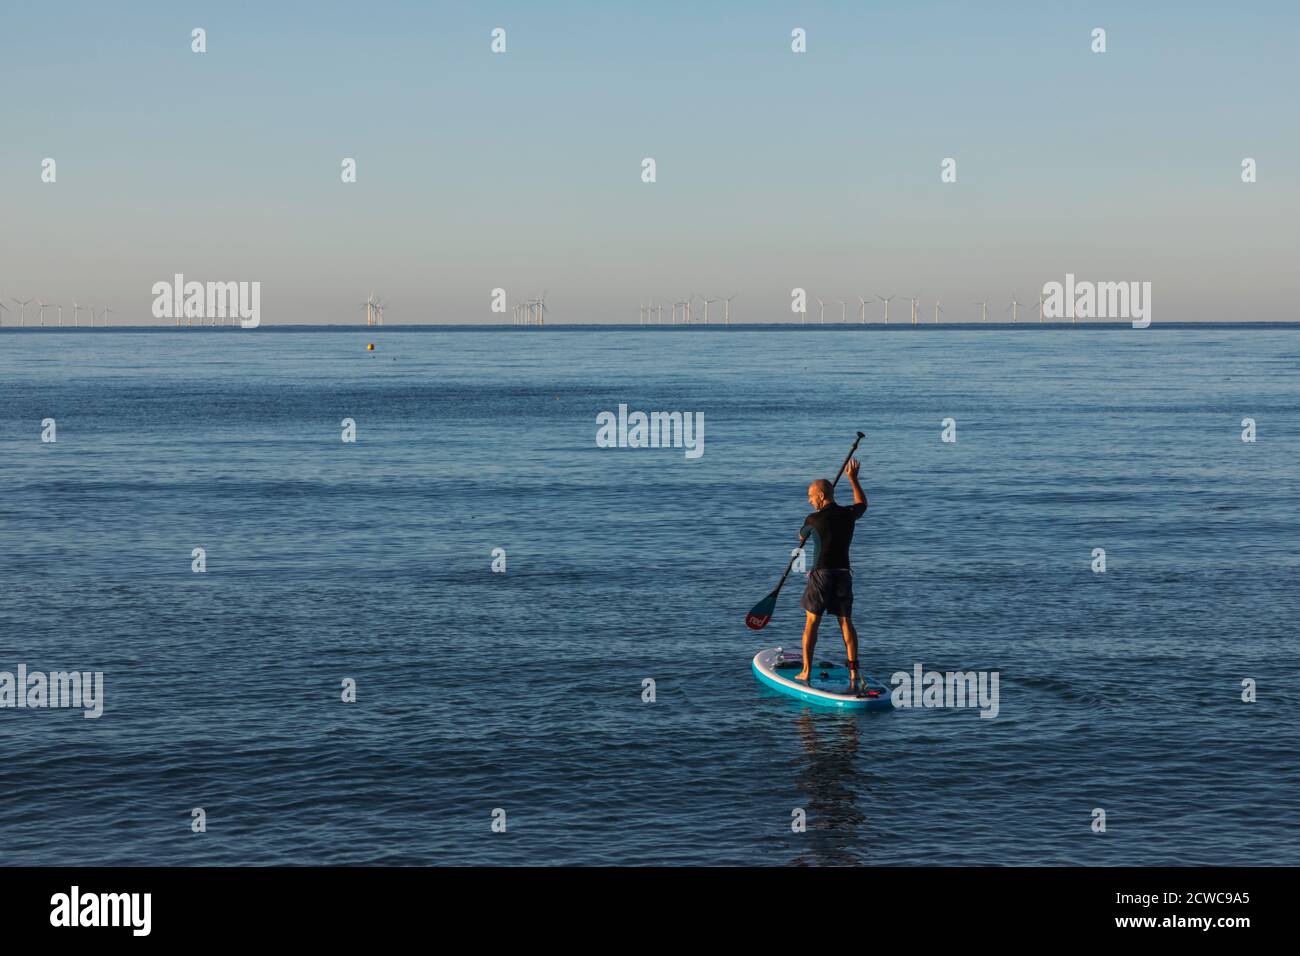 Angleterre, West Sussex, Worthing, Worthing Beach, Paddle Boarder on Calm Sea Banque D'Images